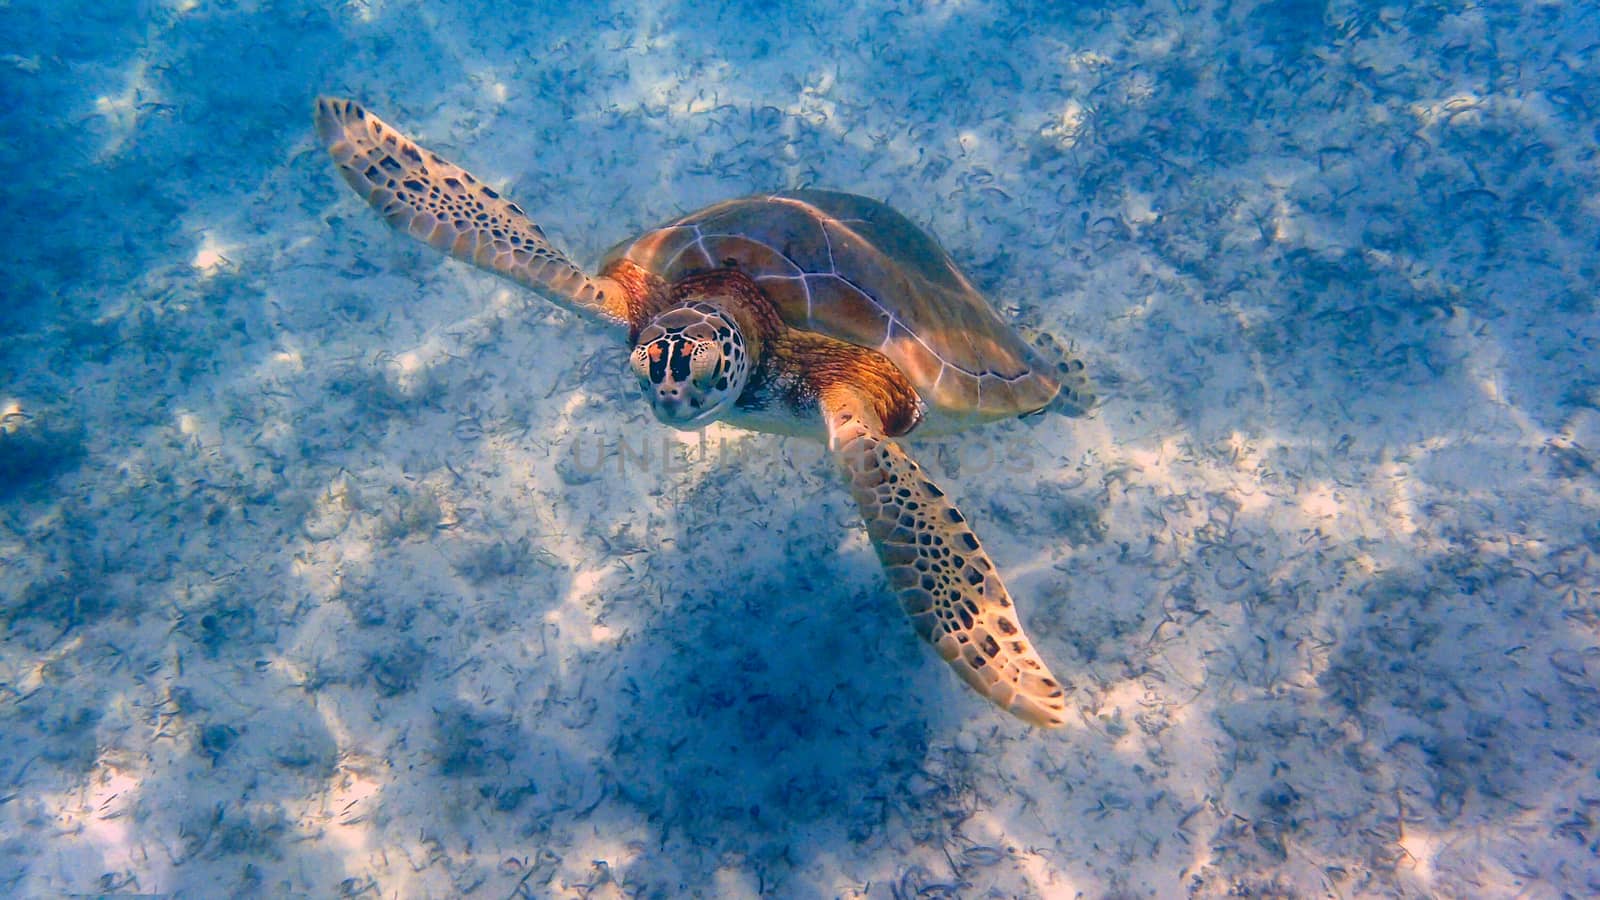 An underwater photo of a Sea Turtle. by Jshanebutt